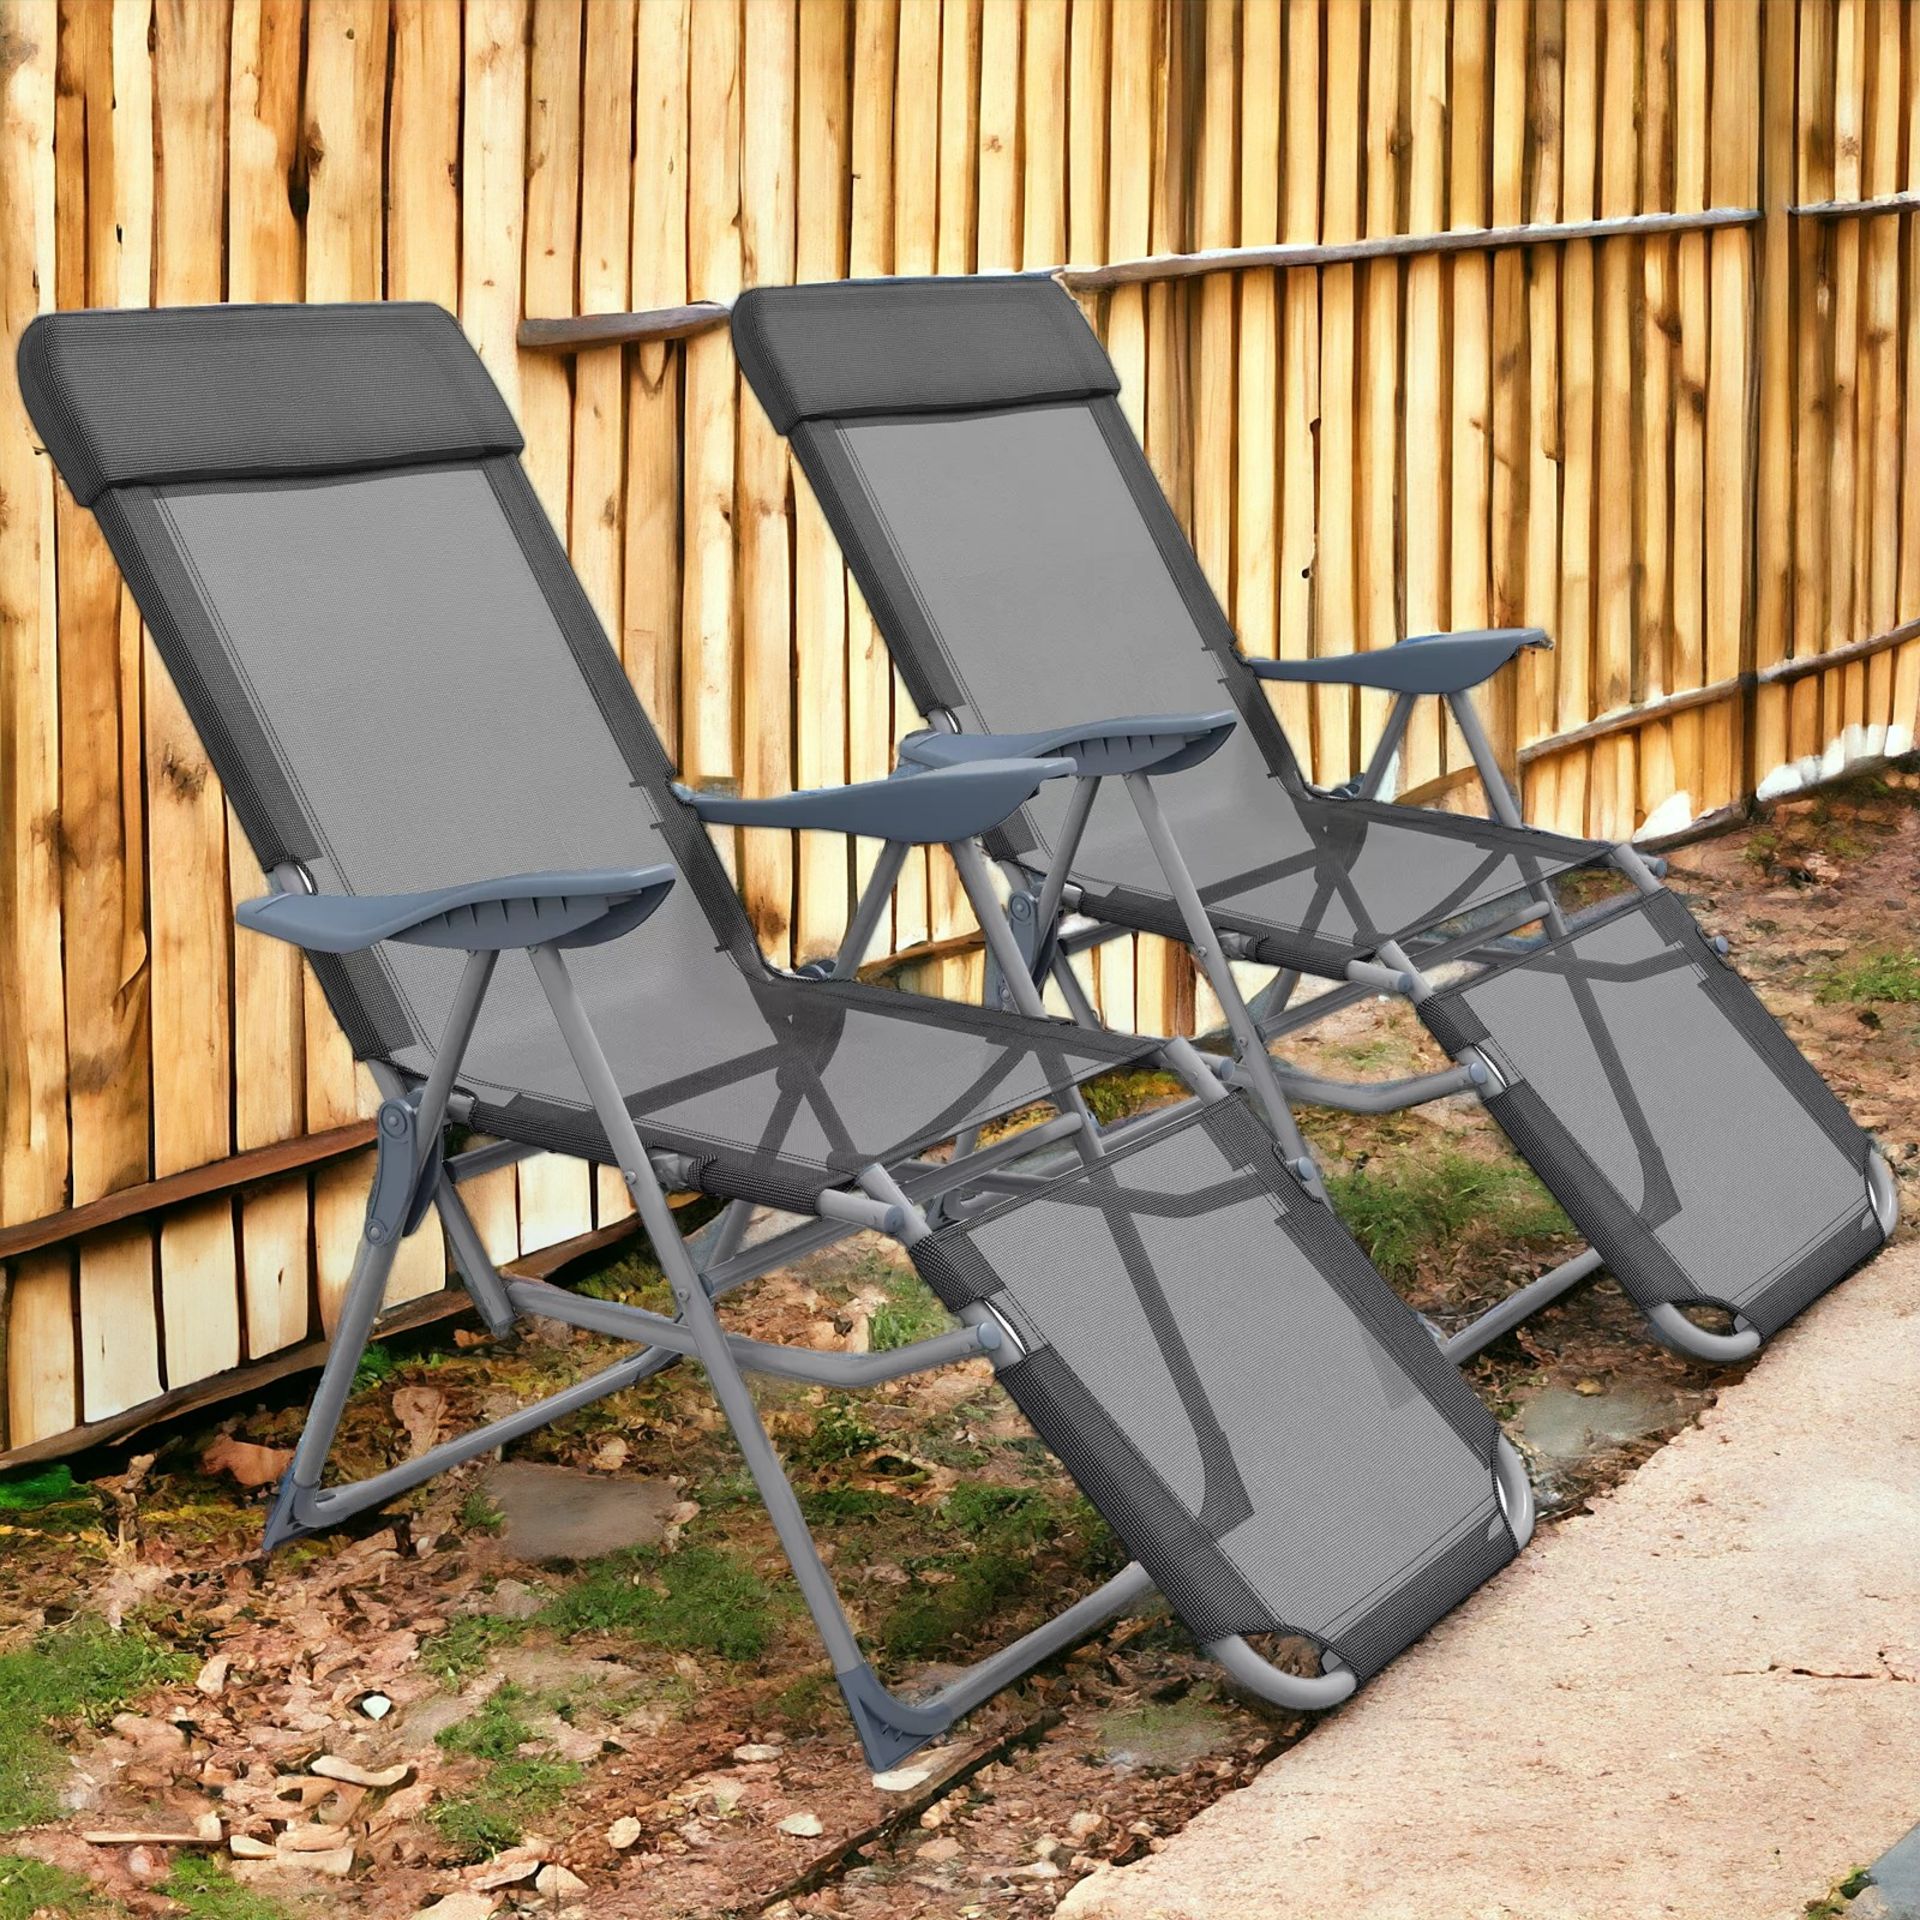 FREE DELIVERY-BRAND NEW RECLINING GARDEN CHAIRS SET OF 2 W/ 5-LEVEL , BLACK